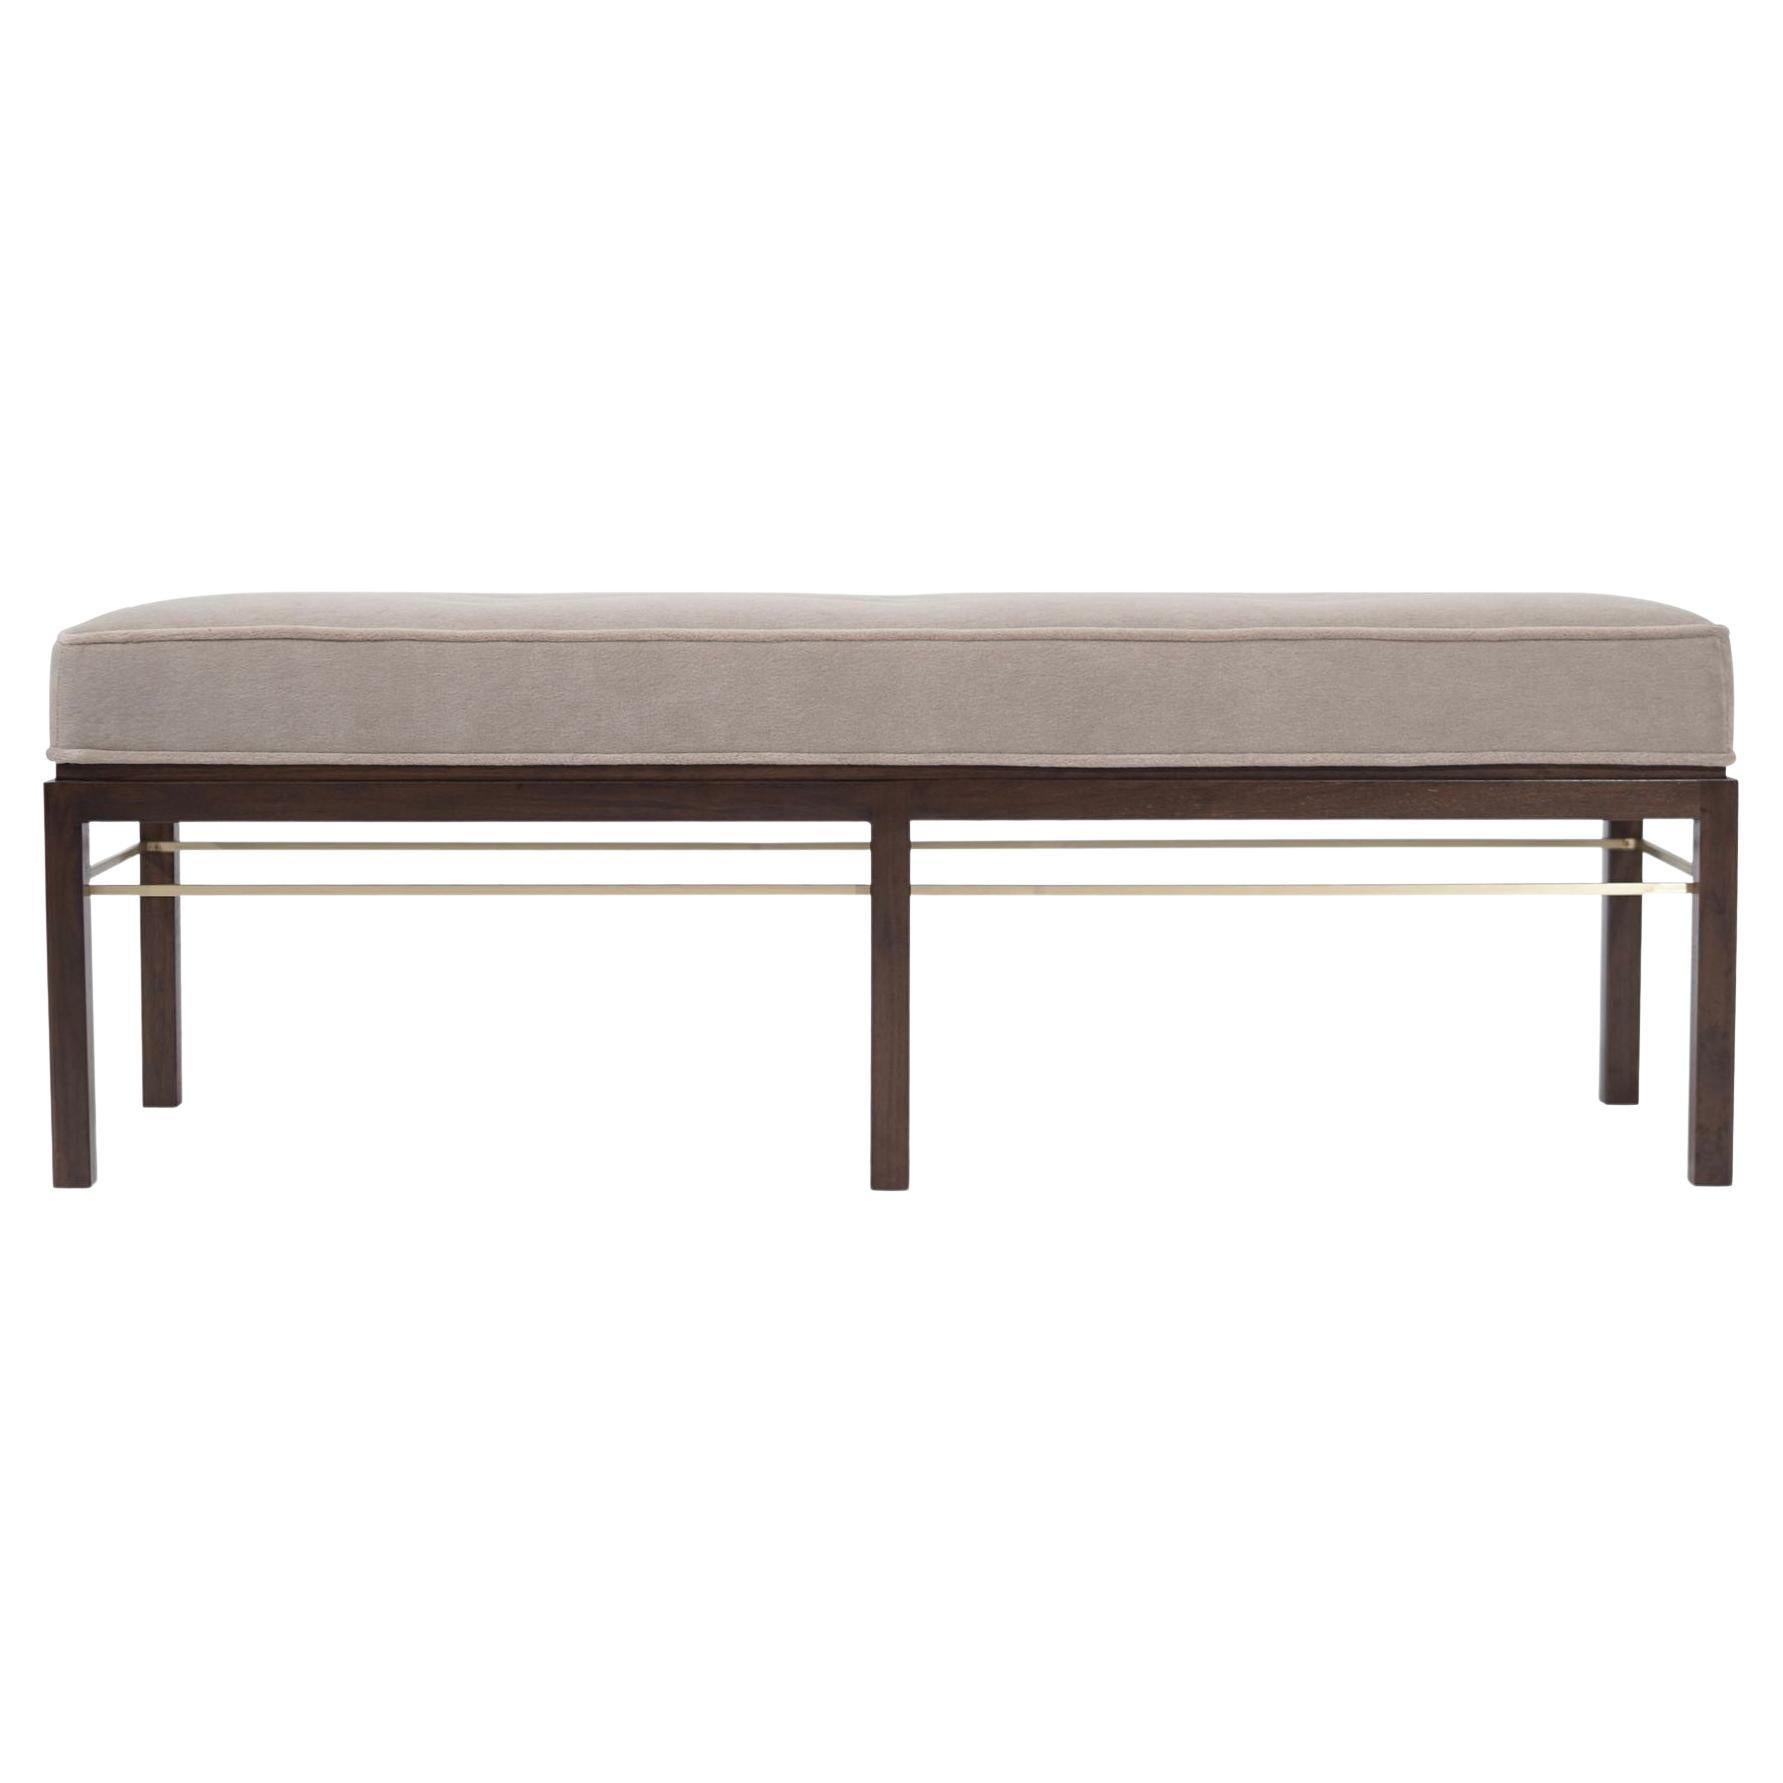 The Minimalist Bench by Stamford Modern For Sale